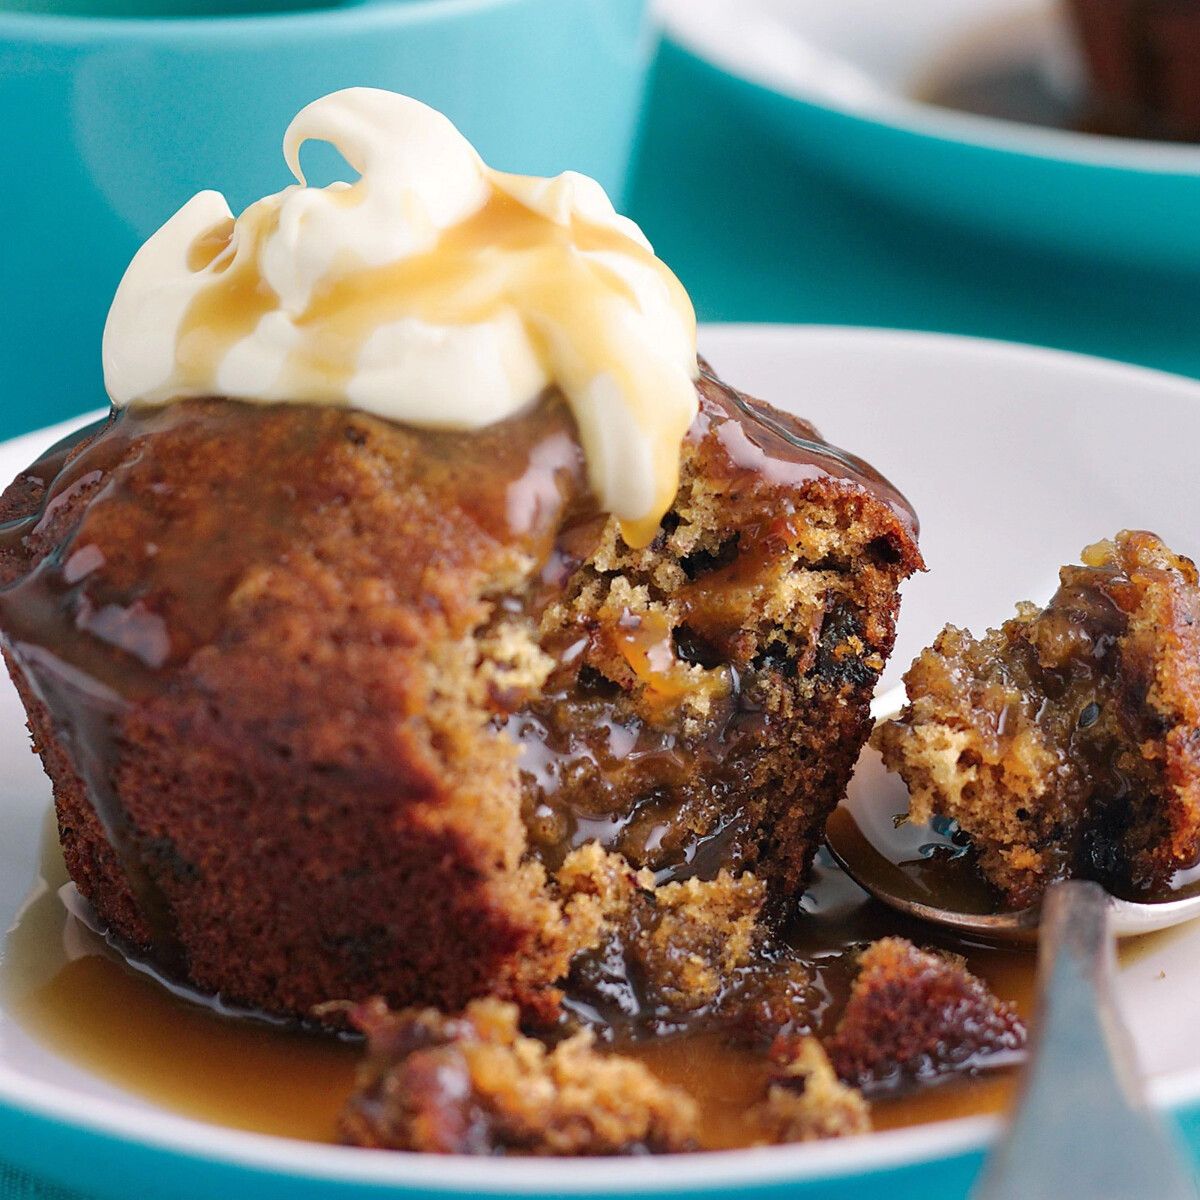 Sticky Date Pudding with Caramel Sauce